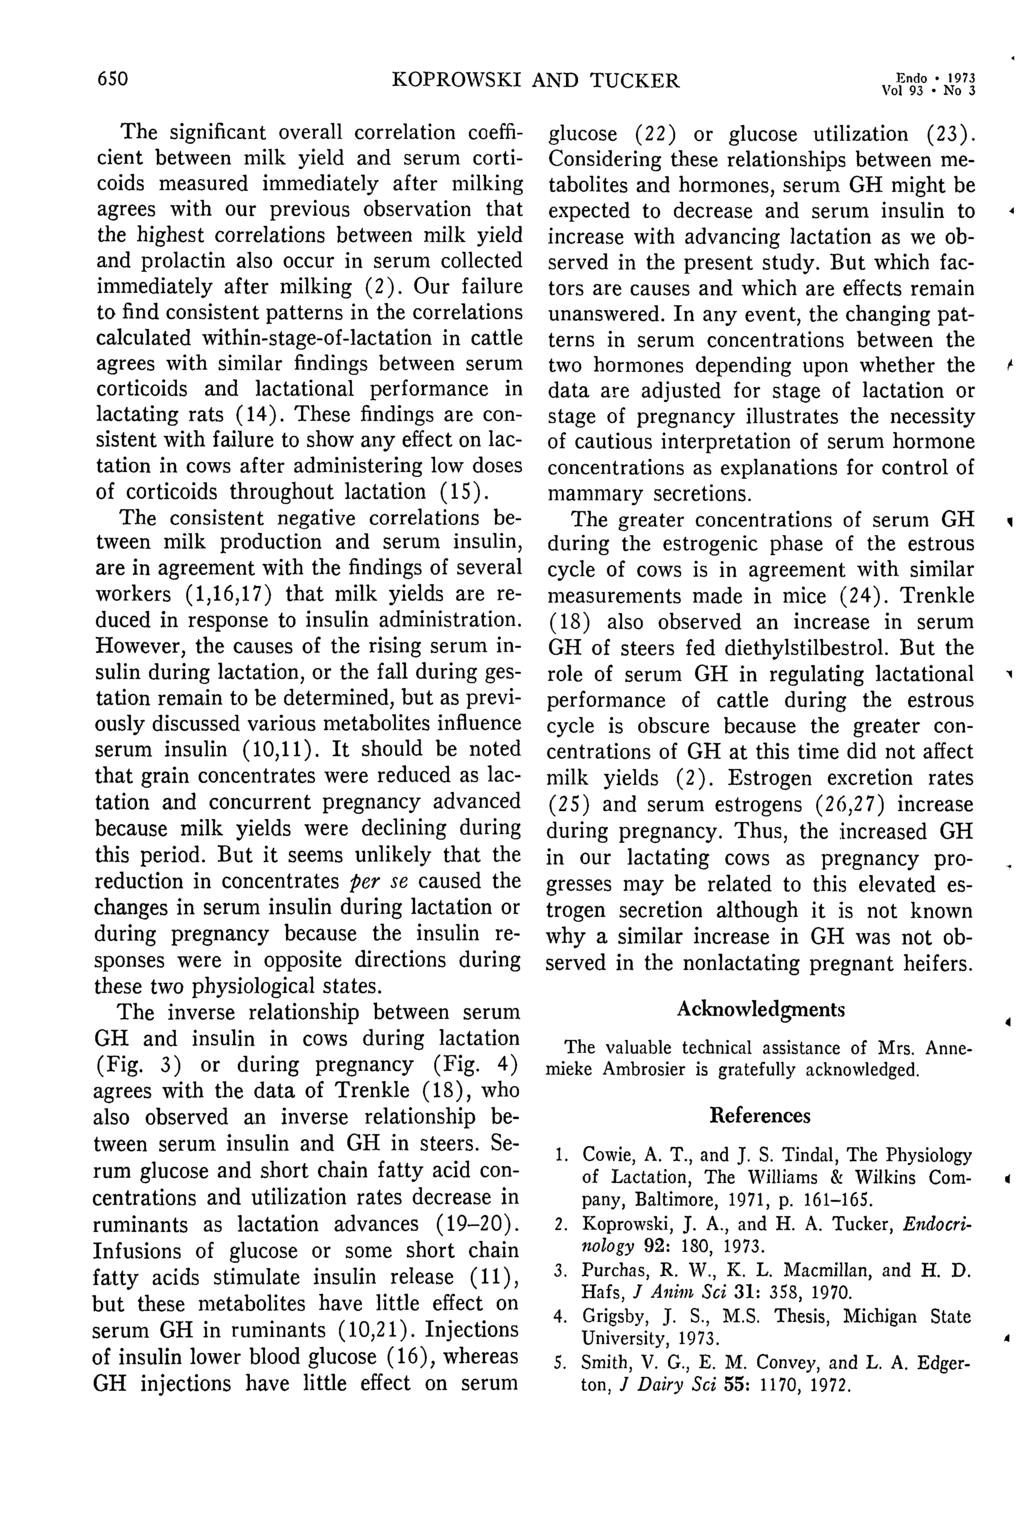 650 KOPROWSKI AND TUCKER Endo Vol 93 1973 No 3 The significant overall correlation coefficient between milk yield and serum corticoids measured immediately after agrees with our previous observation